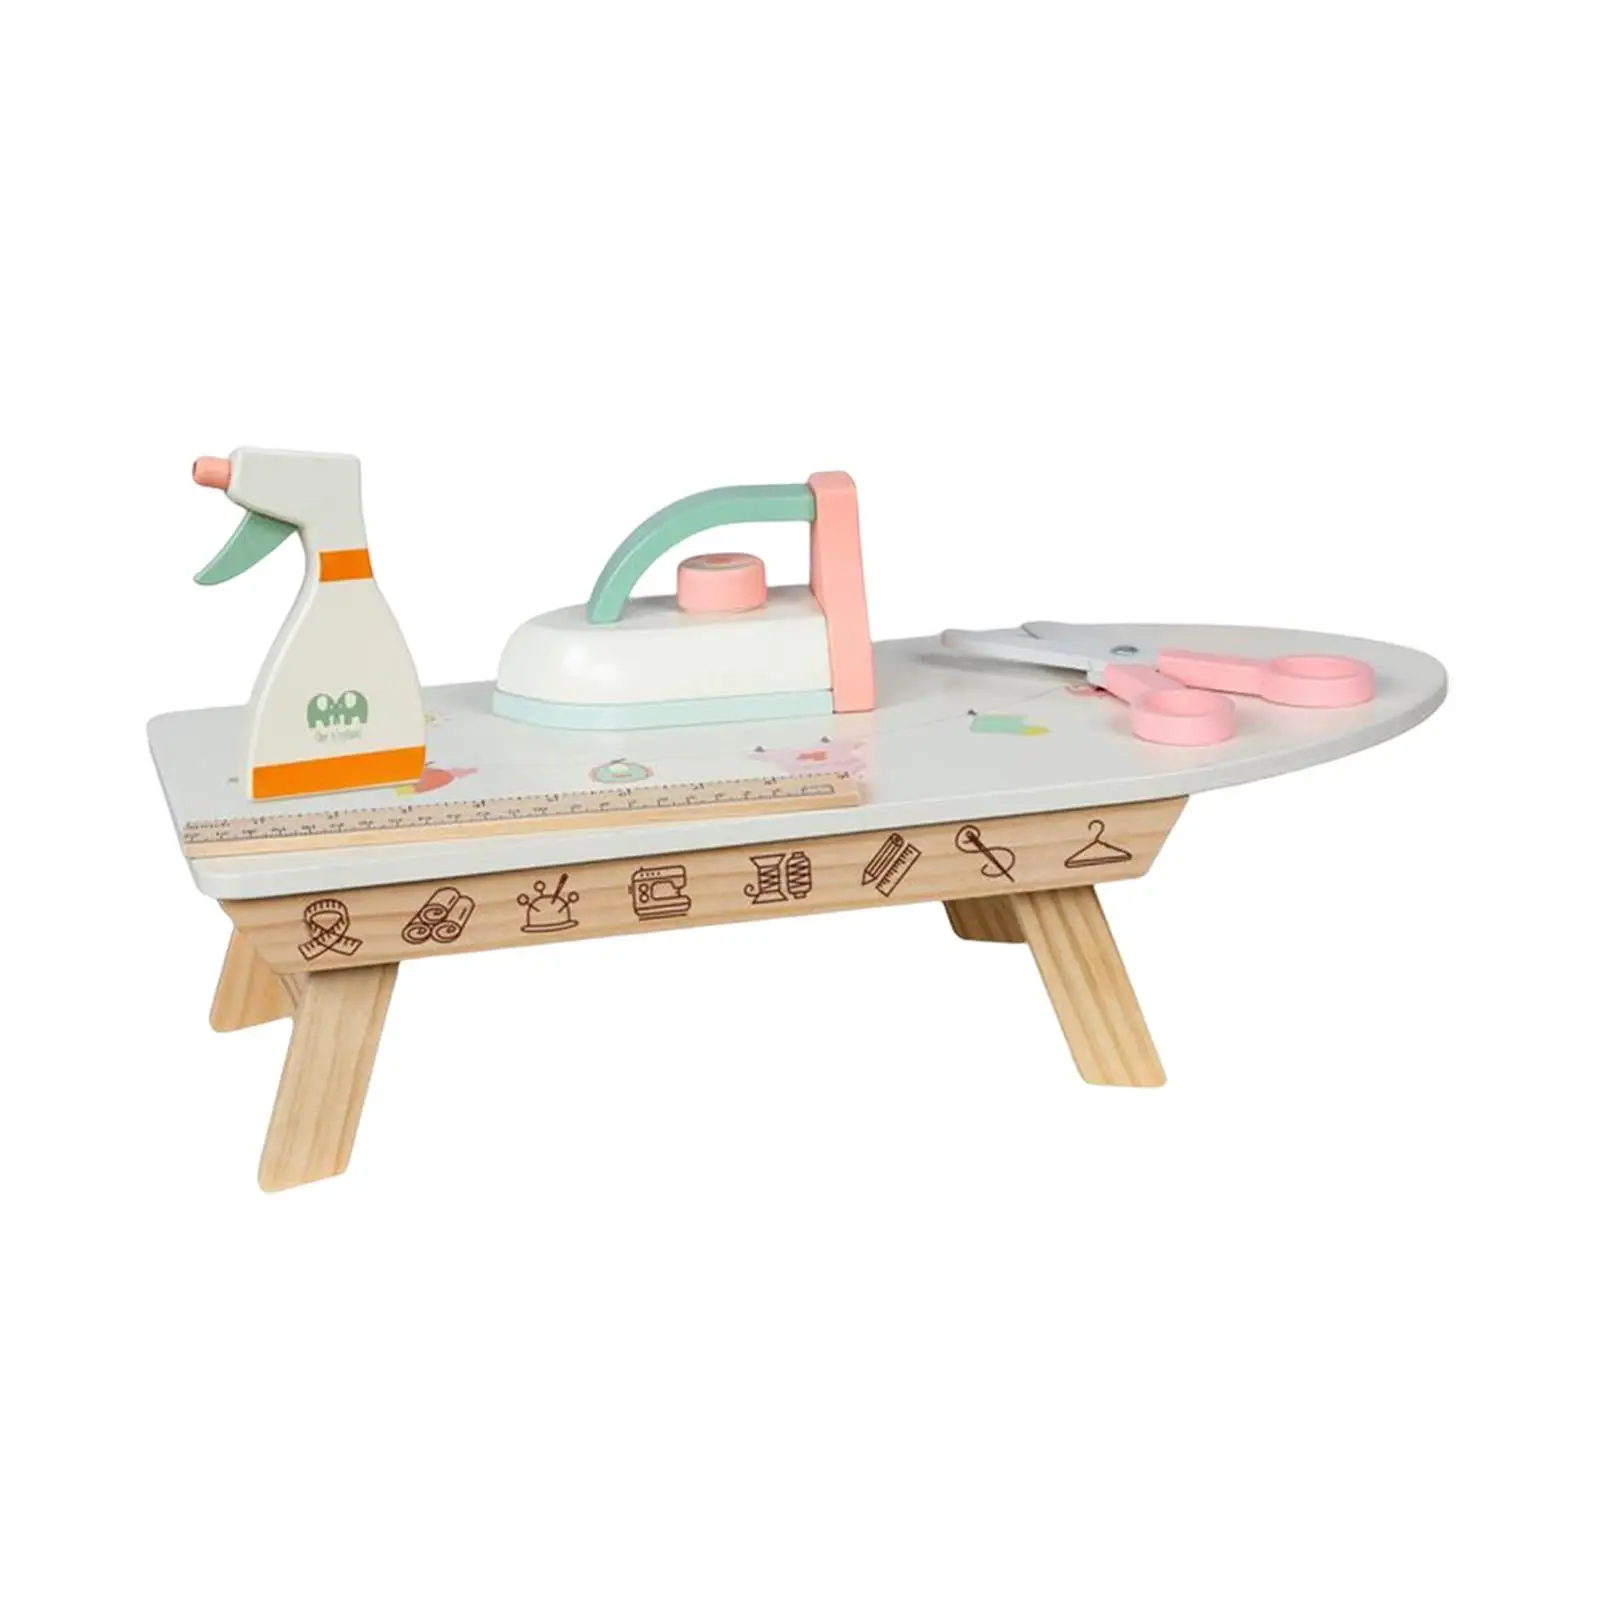 Simulation Ironing Toy Wood Handicraft Toy Fine Motor Skill with Wooden Iron, Ironing Board, and Accessories for Children Kids